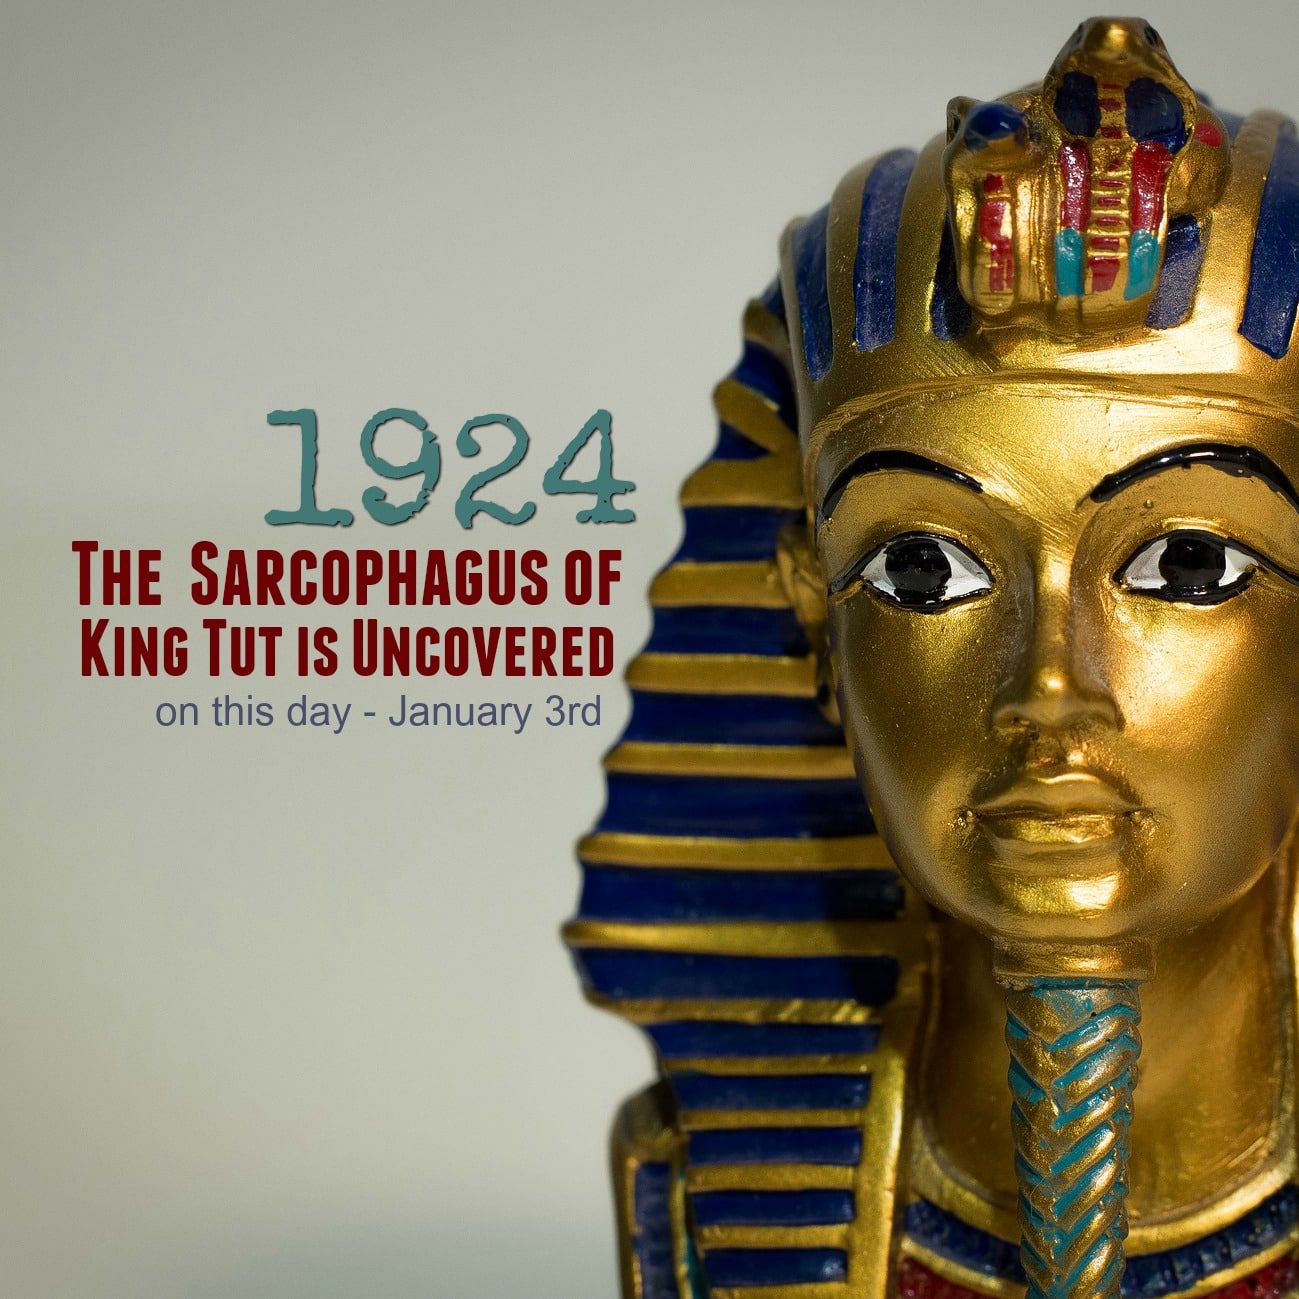 1924 – Sarcophagus of King Tut Uncovered January 3rd